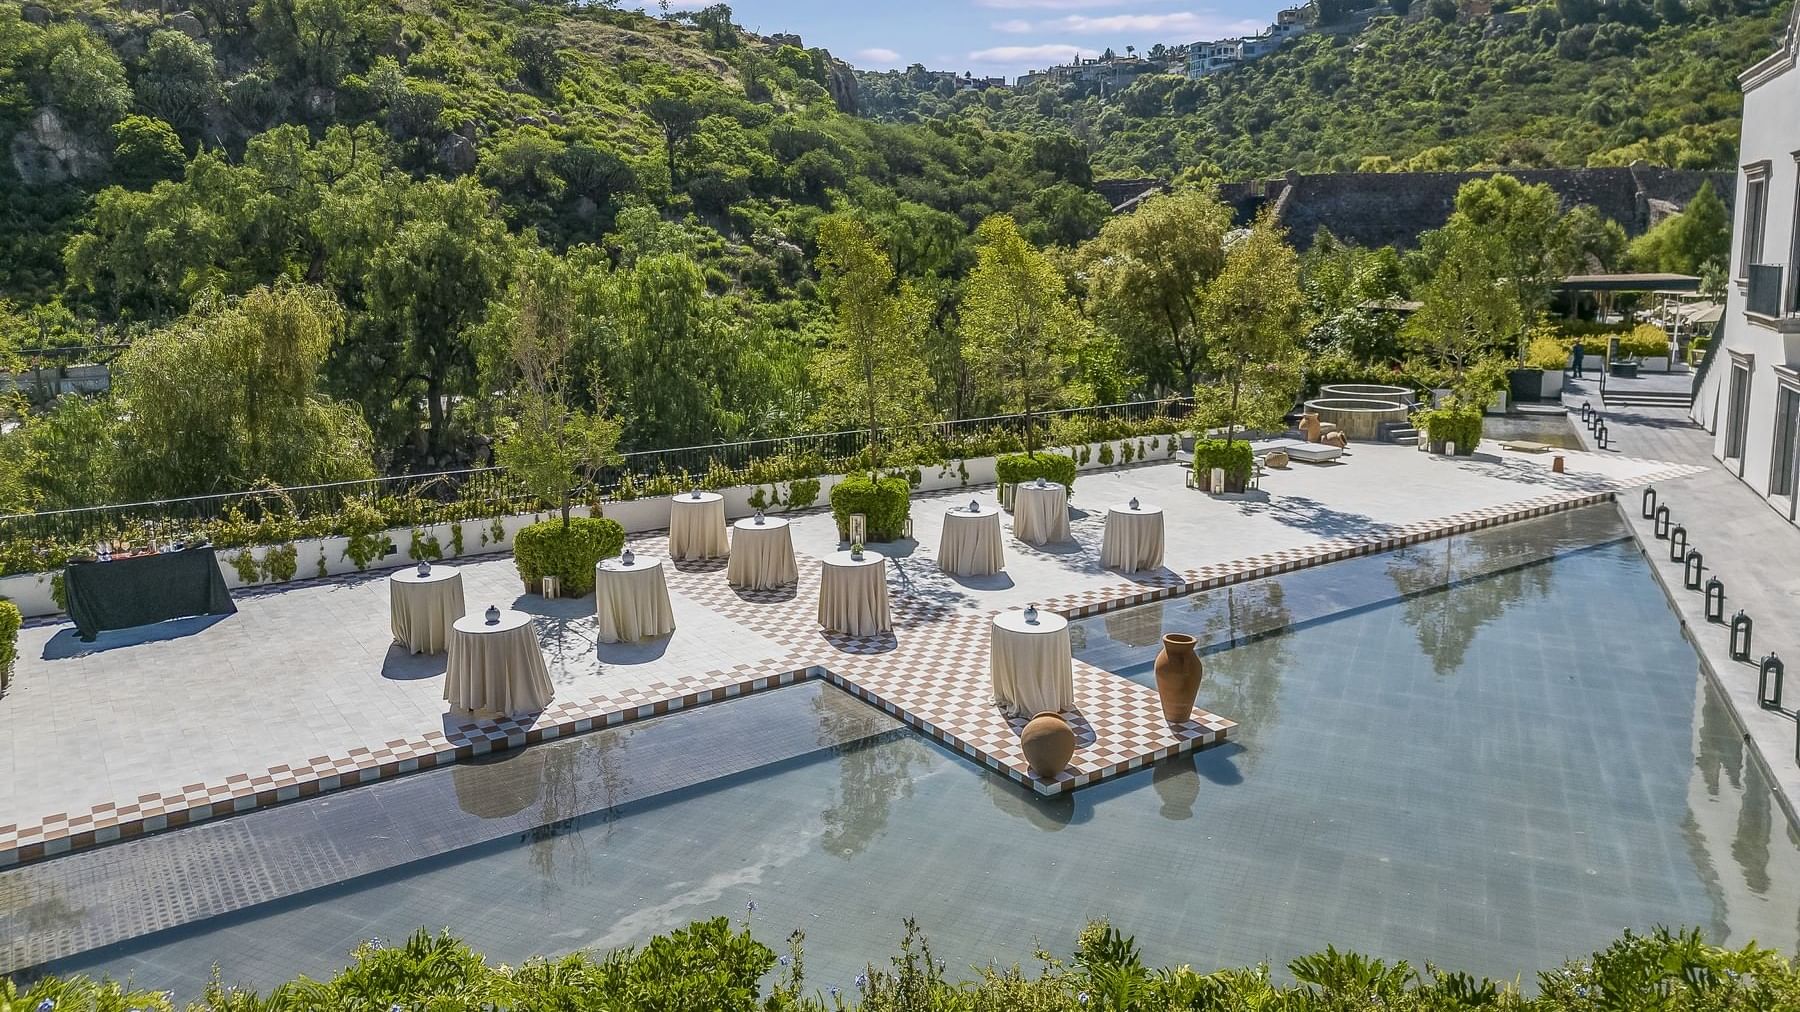 Pool with trees & mountainous landscape in the background at Live Aqua San Miguel de Allende